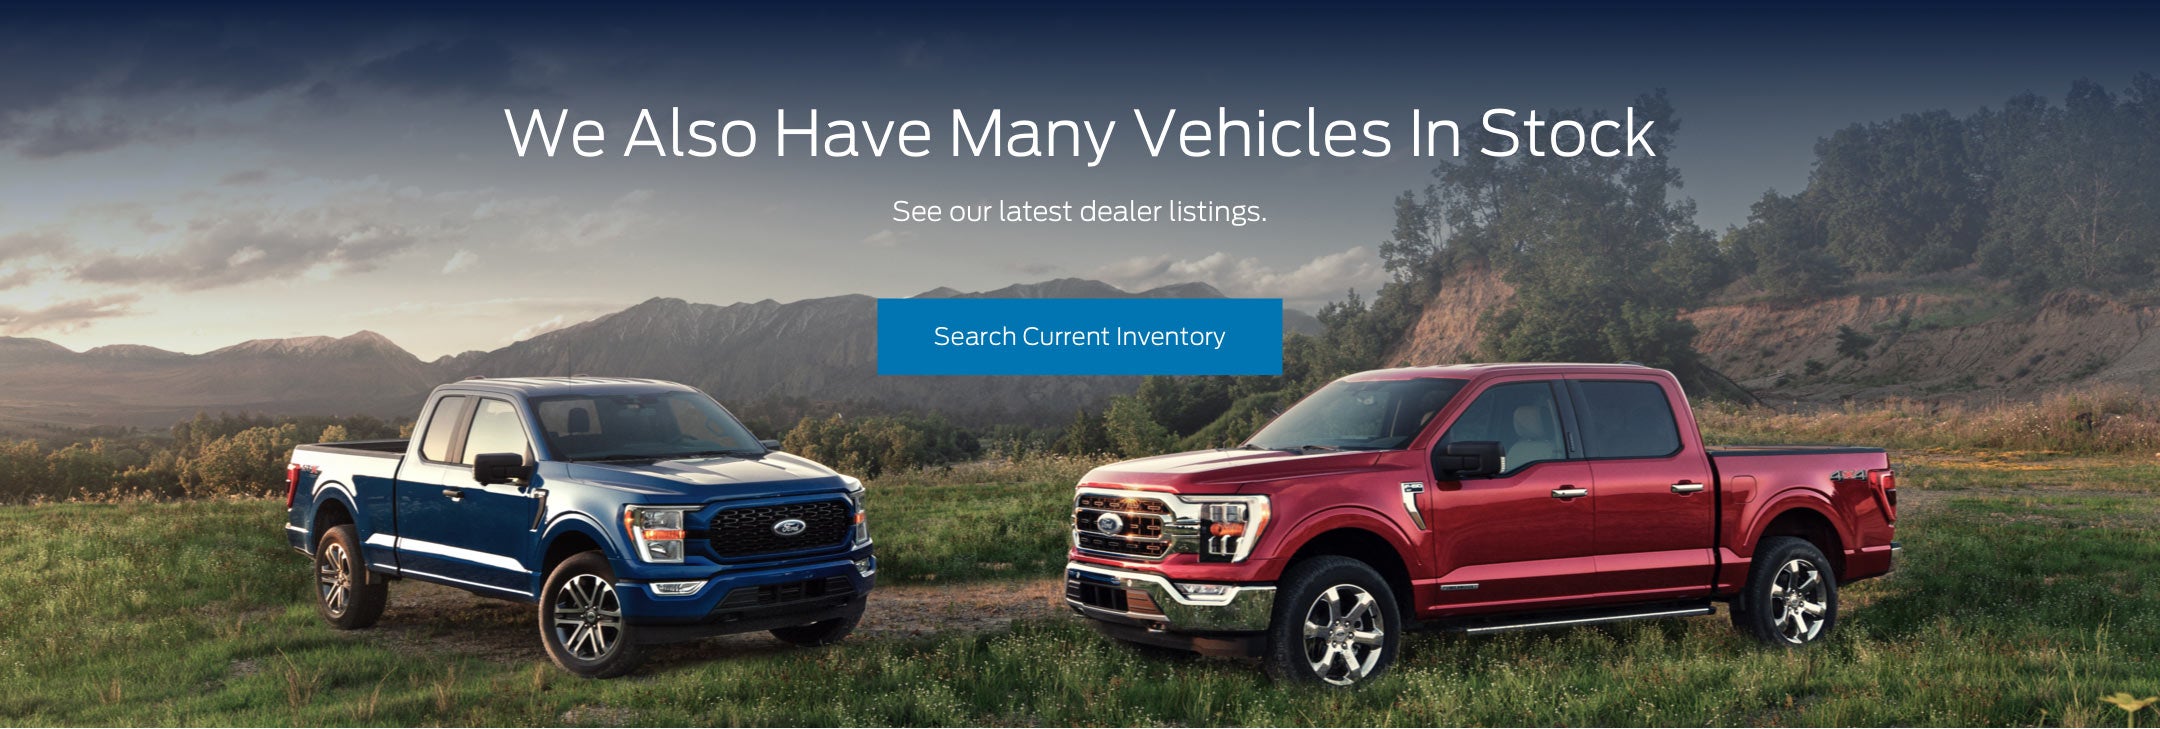 Ford vehicles in stock | Albemarle Ford in Albemarle NC